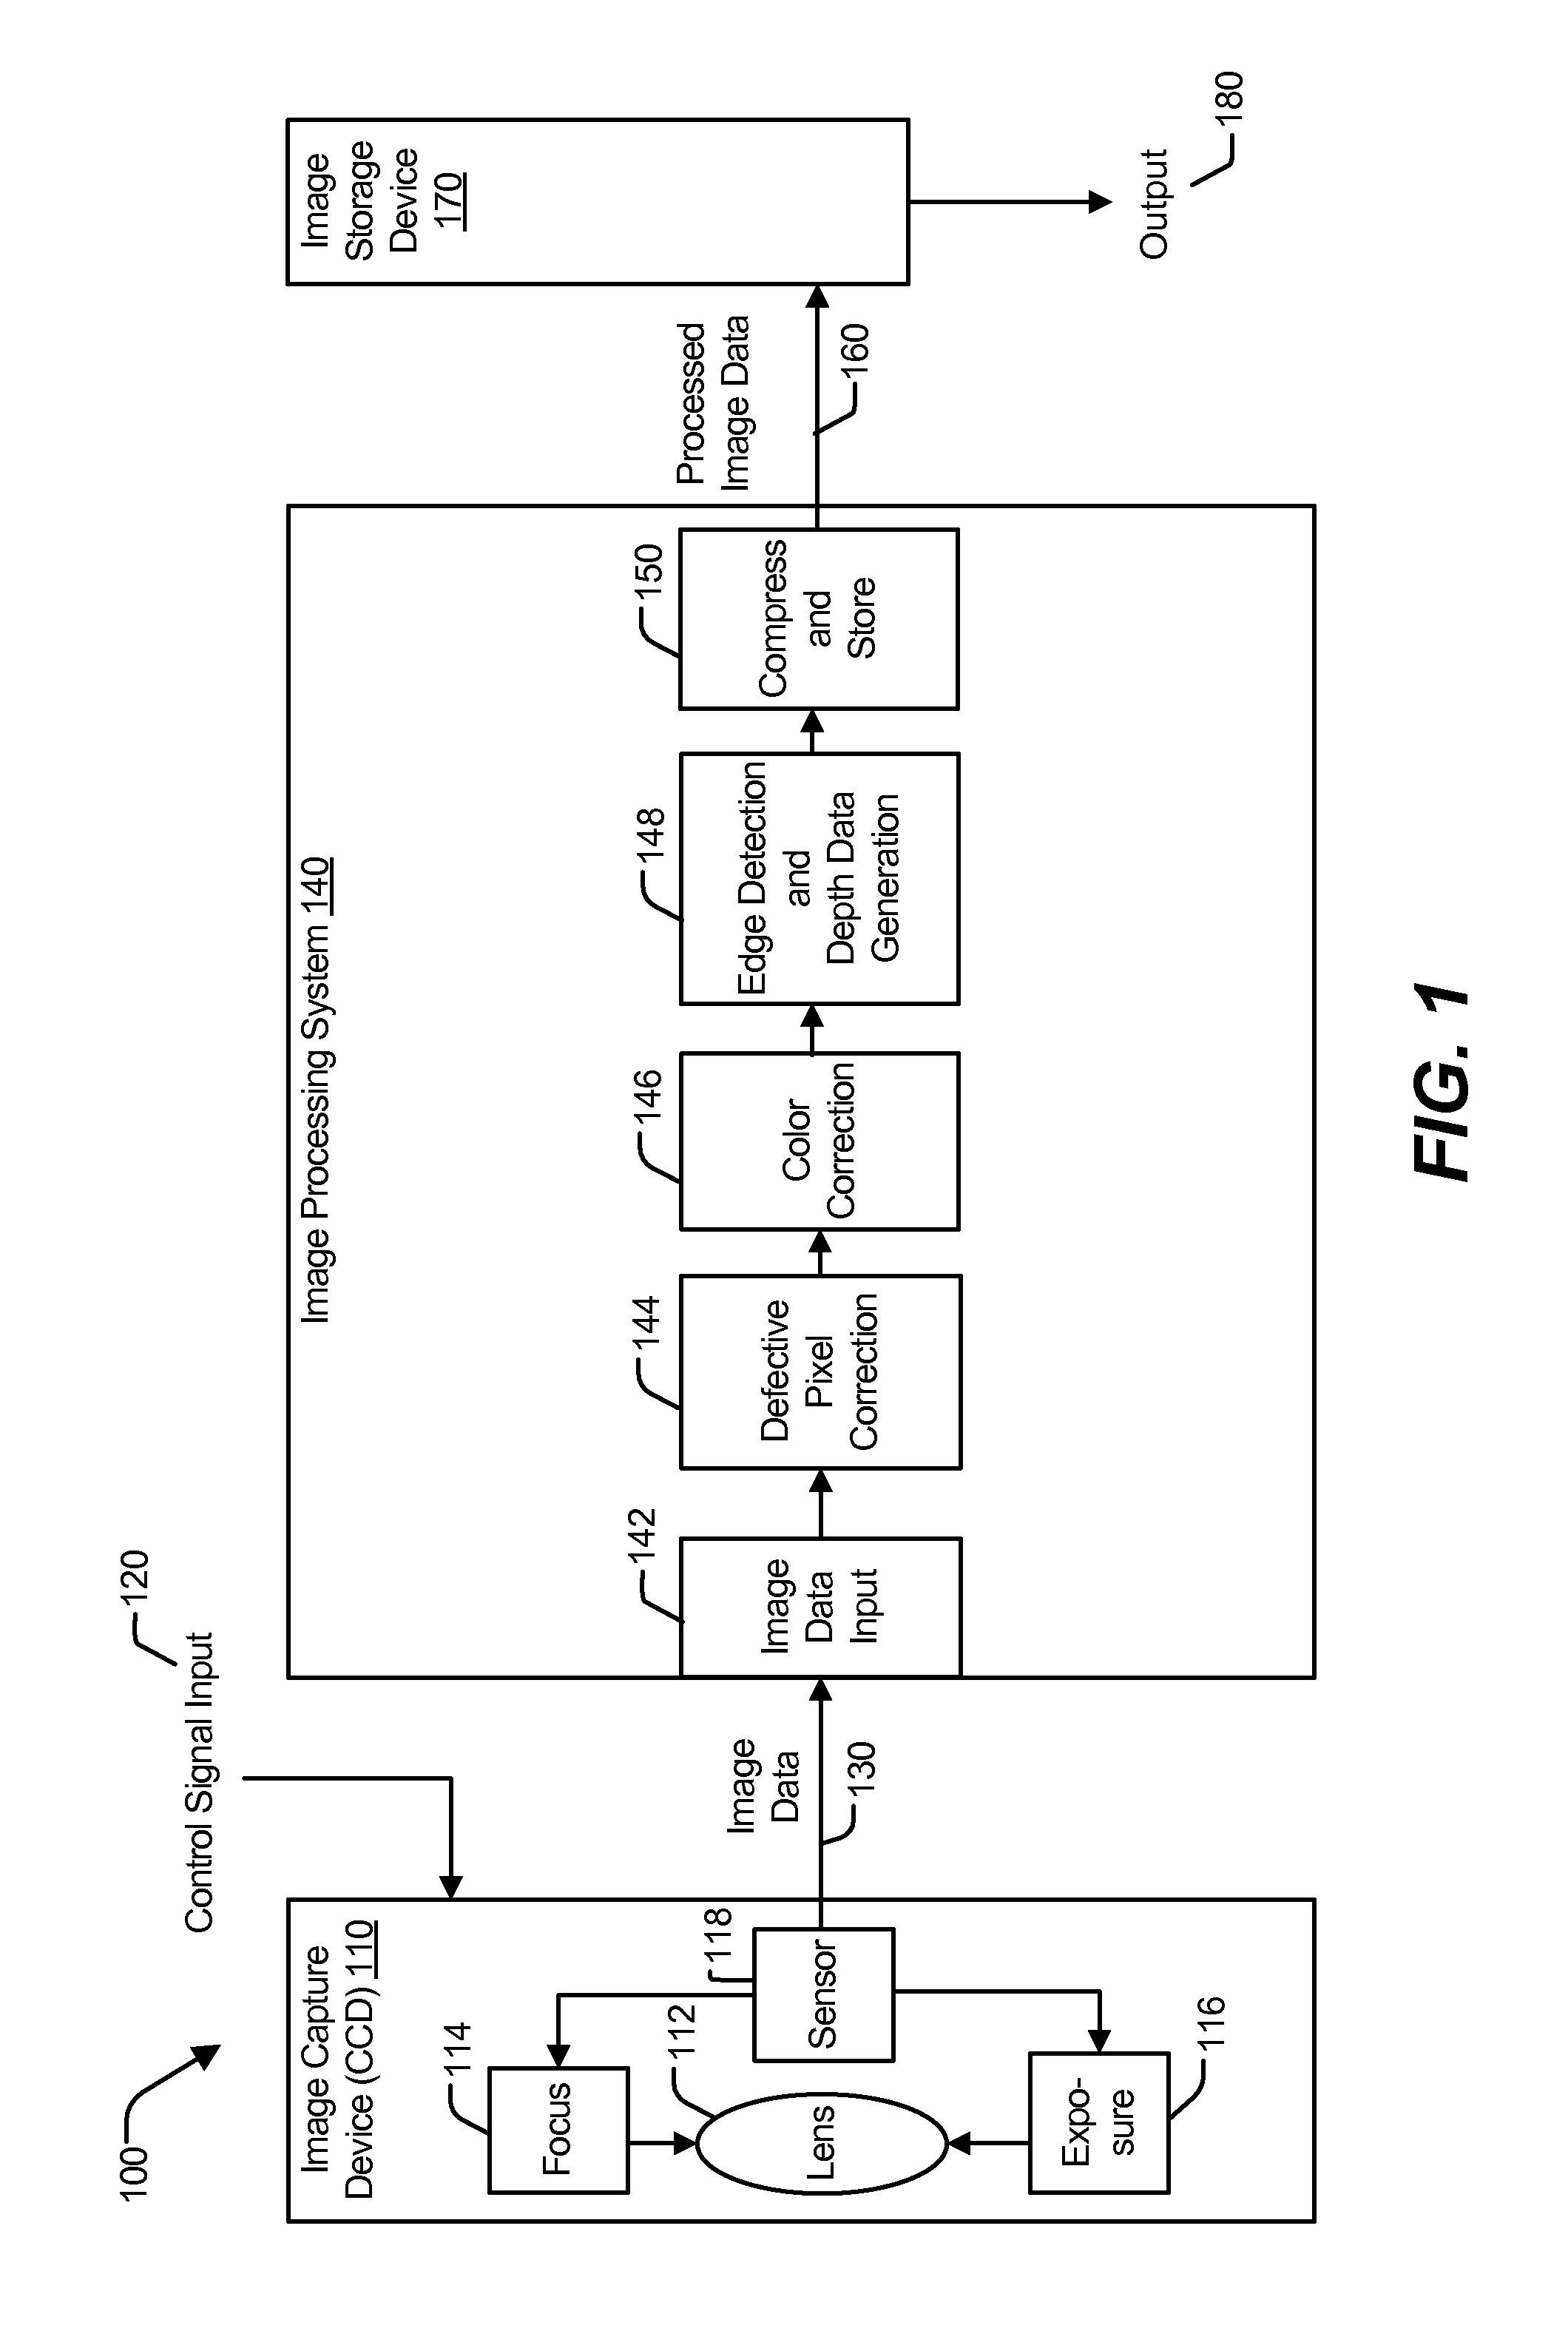 System and method to generate depth data using edge detection